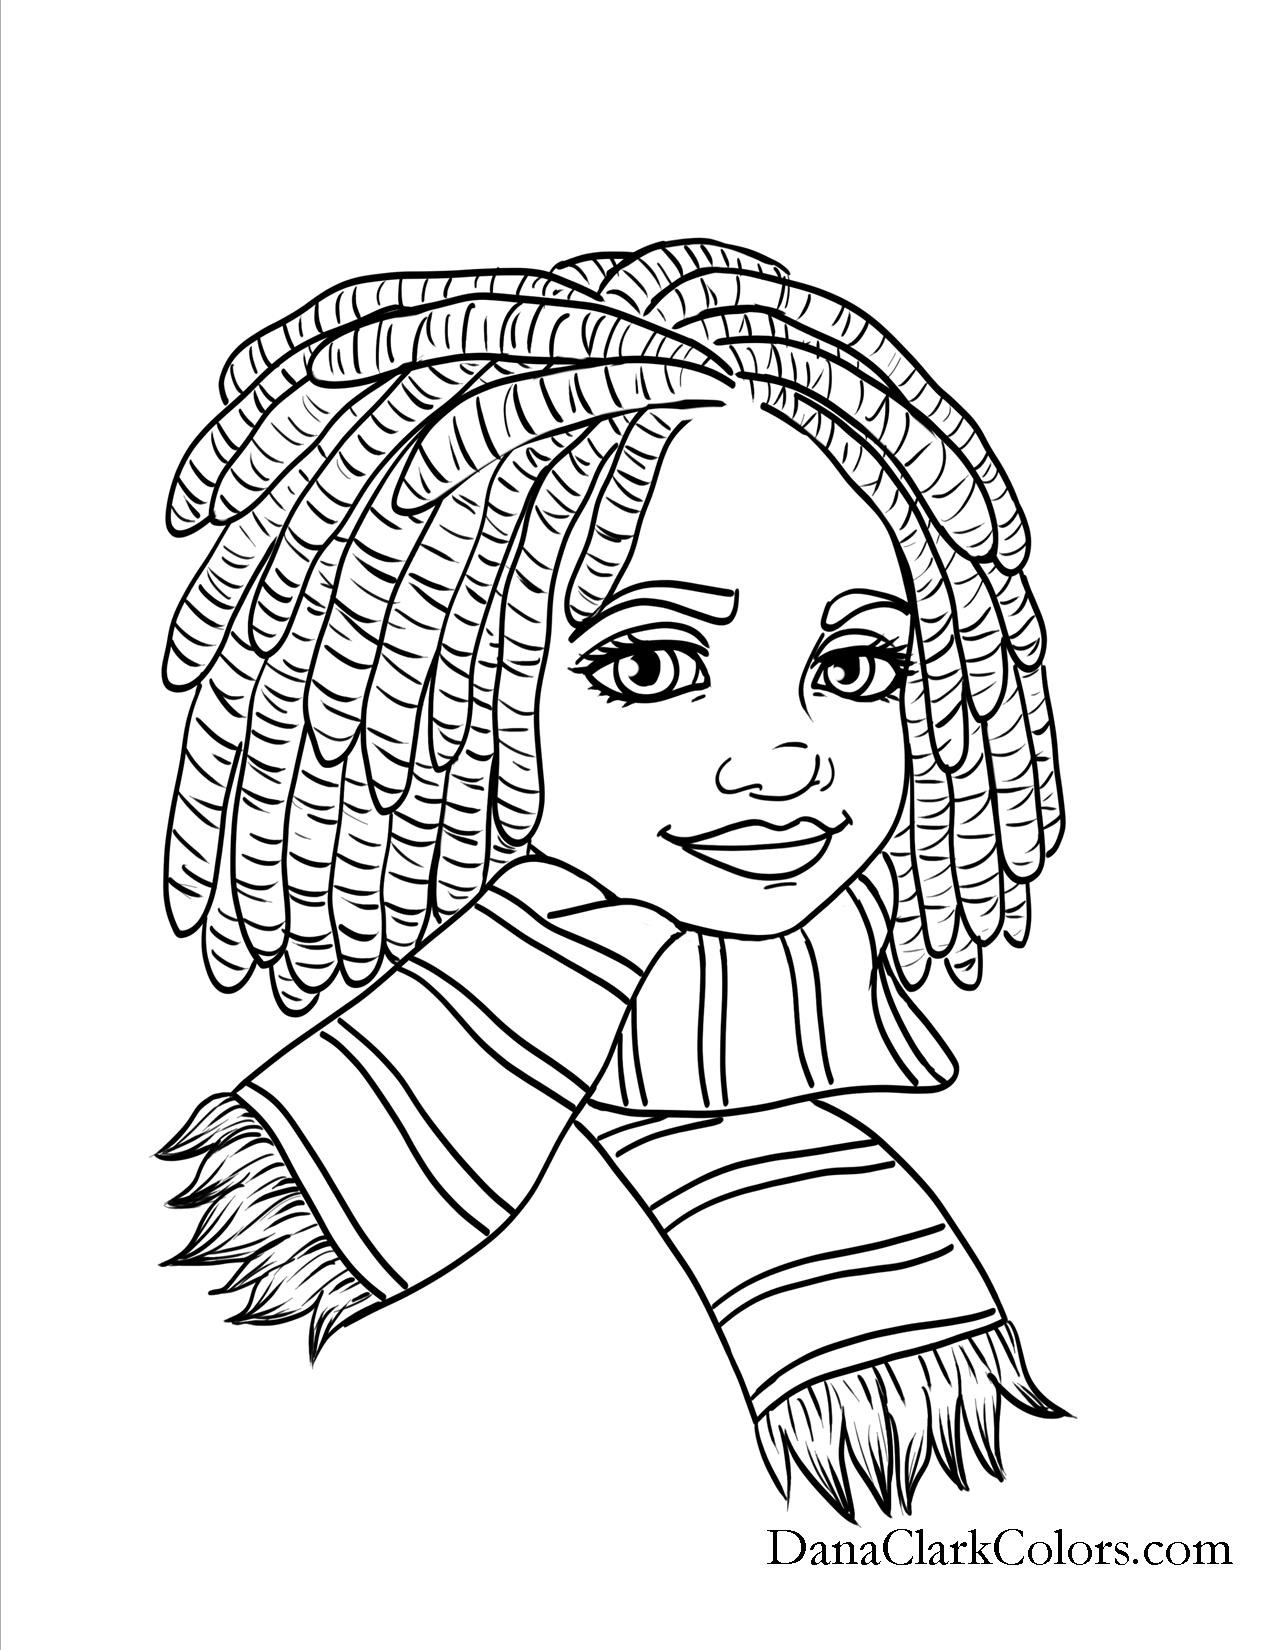 Black Girls Coloring Pages
 Free Coloring Page 7 DanaClarkColors